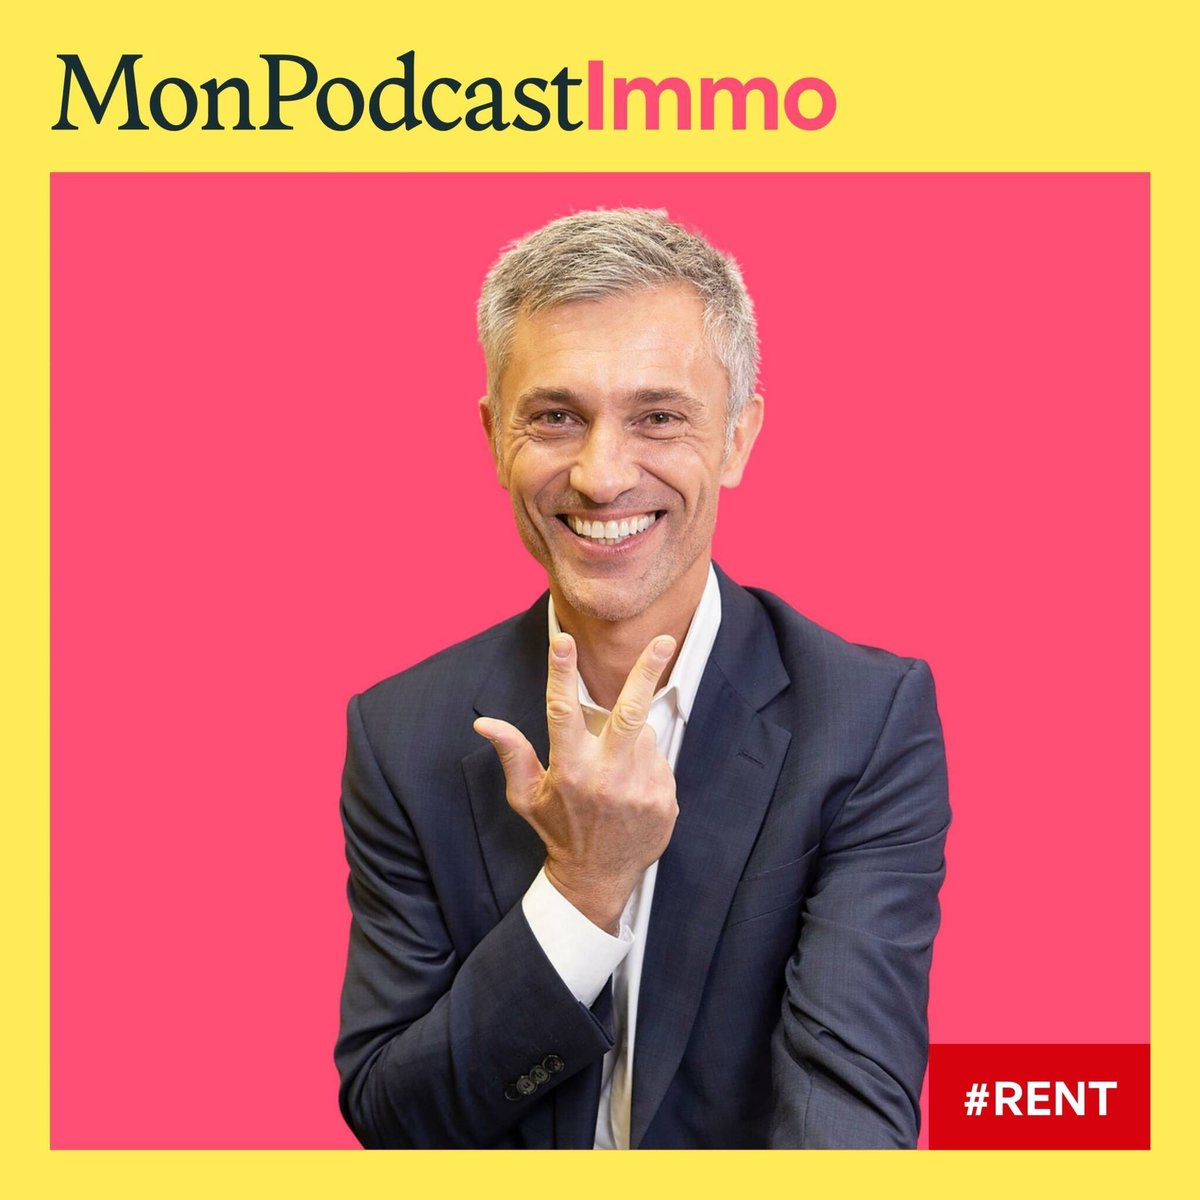 « Agent immobilier : Comment performer en période de crise », Thibault Guillaume, VitrineMedia @Mysweetimmo mysweetimmo.com/2023/11/20/age…